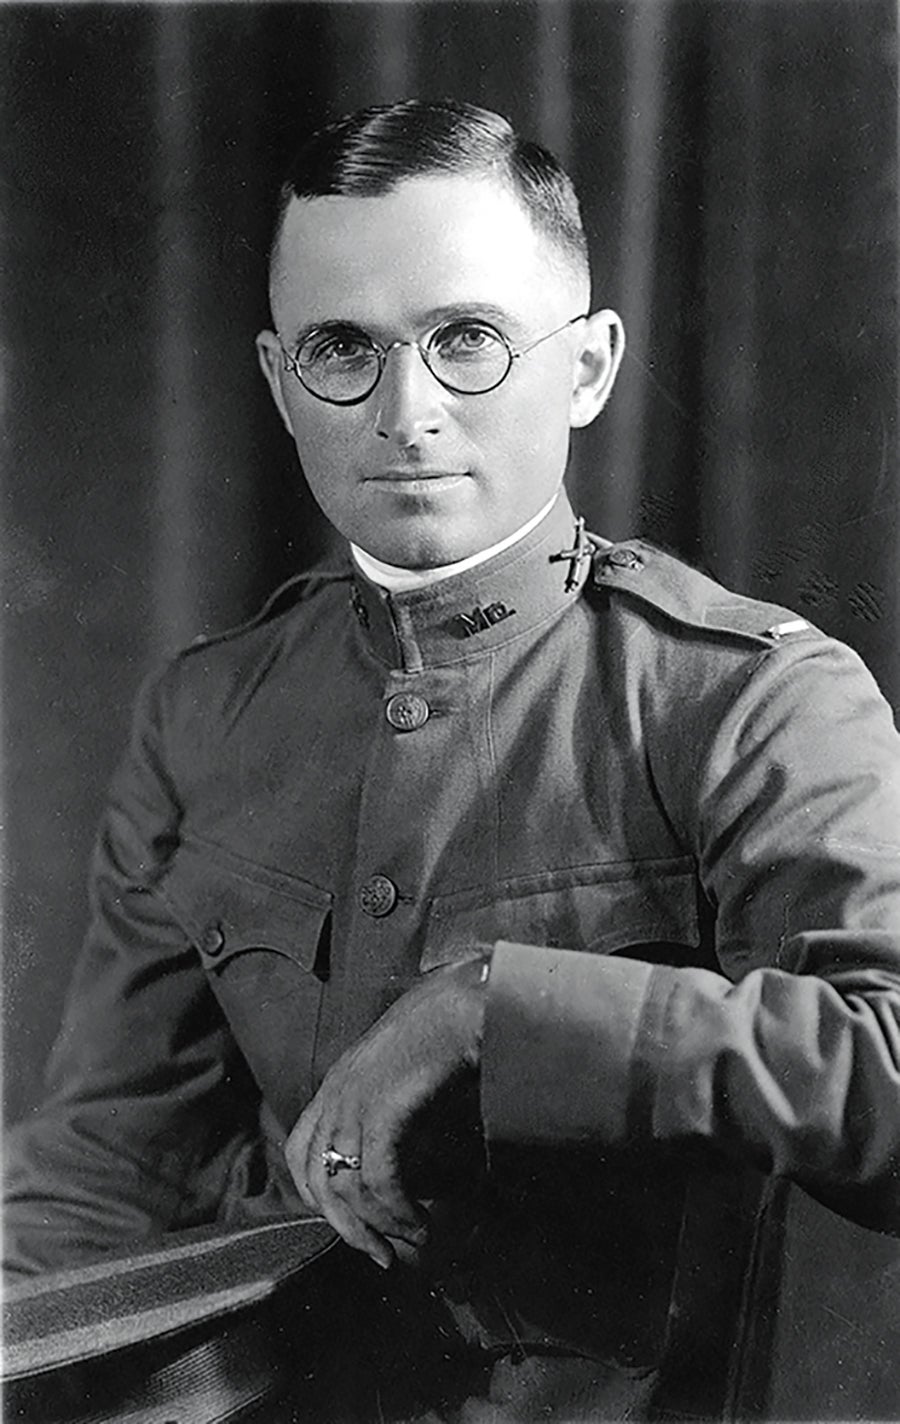 First Lt. Truman in September 1917. (Credit: Wikipedia/Harry S. Truman Library)